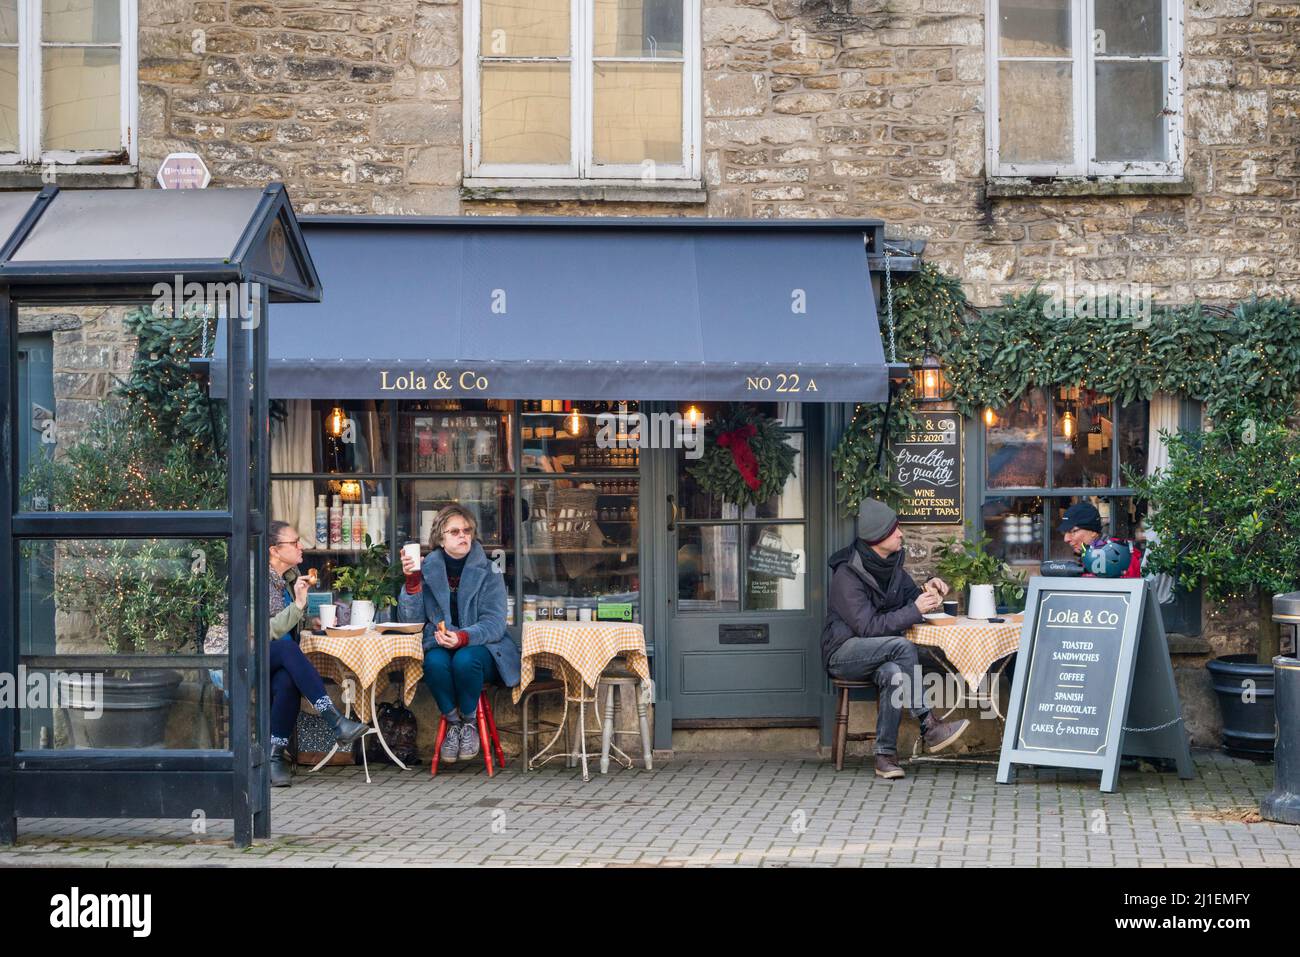 People having coffee outside of cafe during Covid 19 pandemic despite cold weather, Tetbury, Gloucestershire, UK Stock Photo